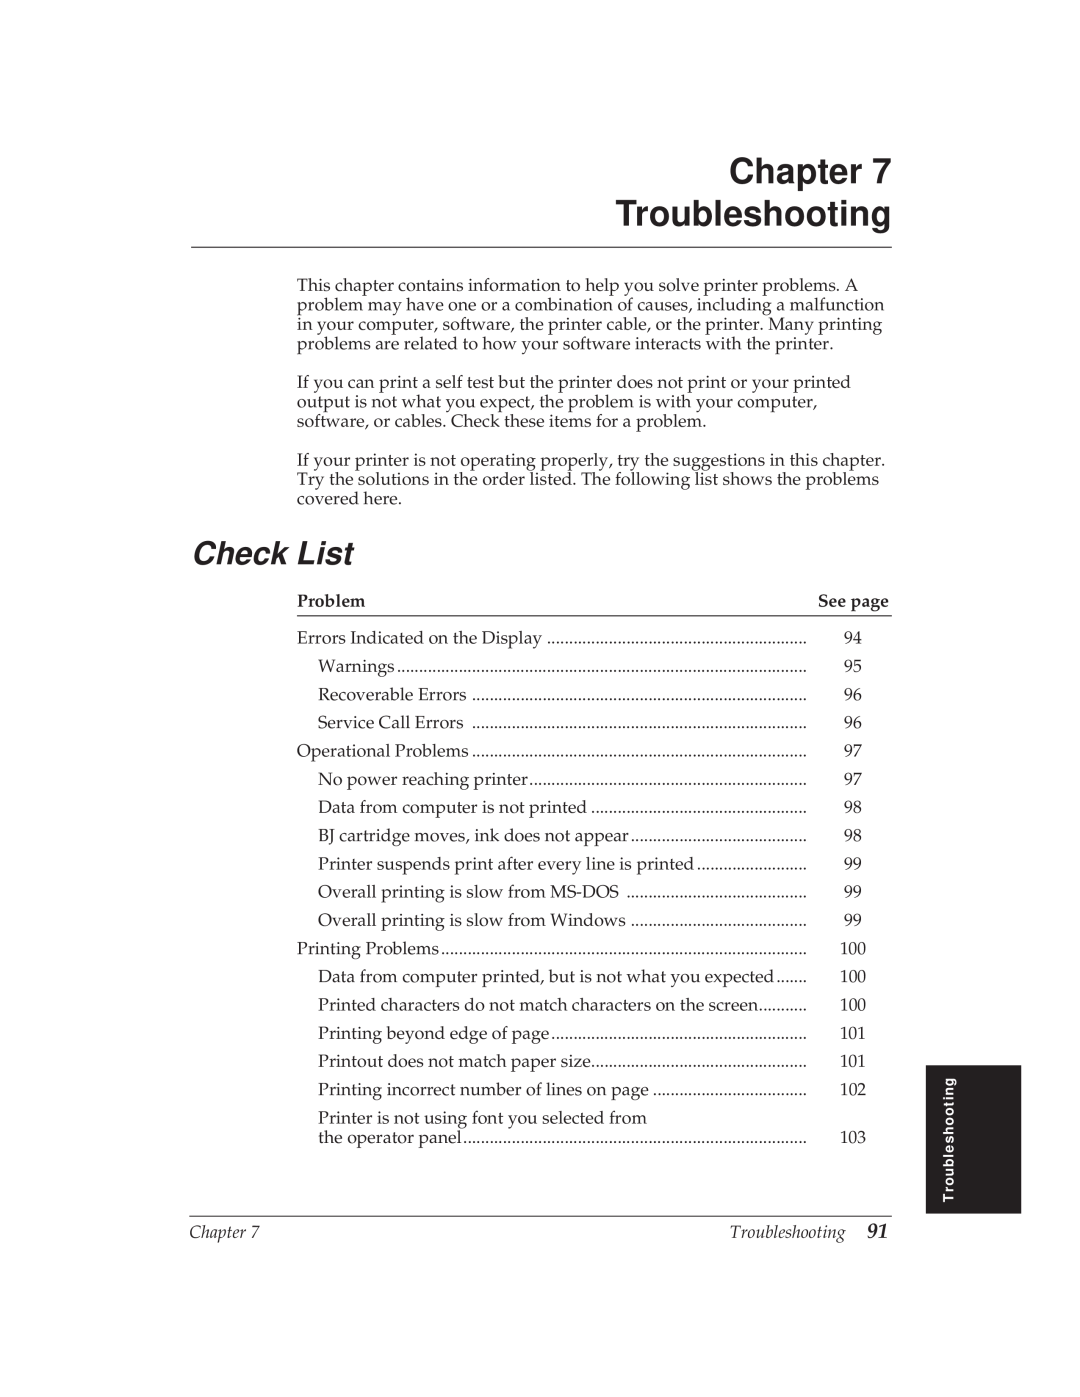 Canon BJ-30 manual Chapter Troubleshooting, Check List, Problem, See page 